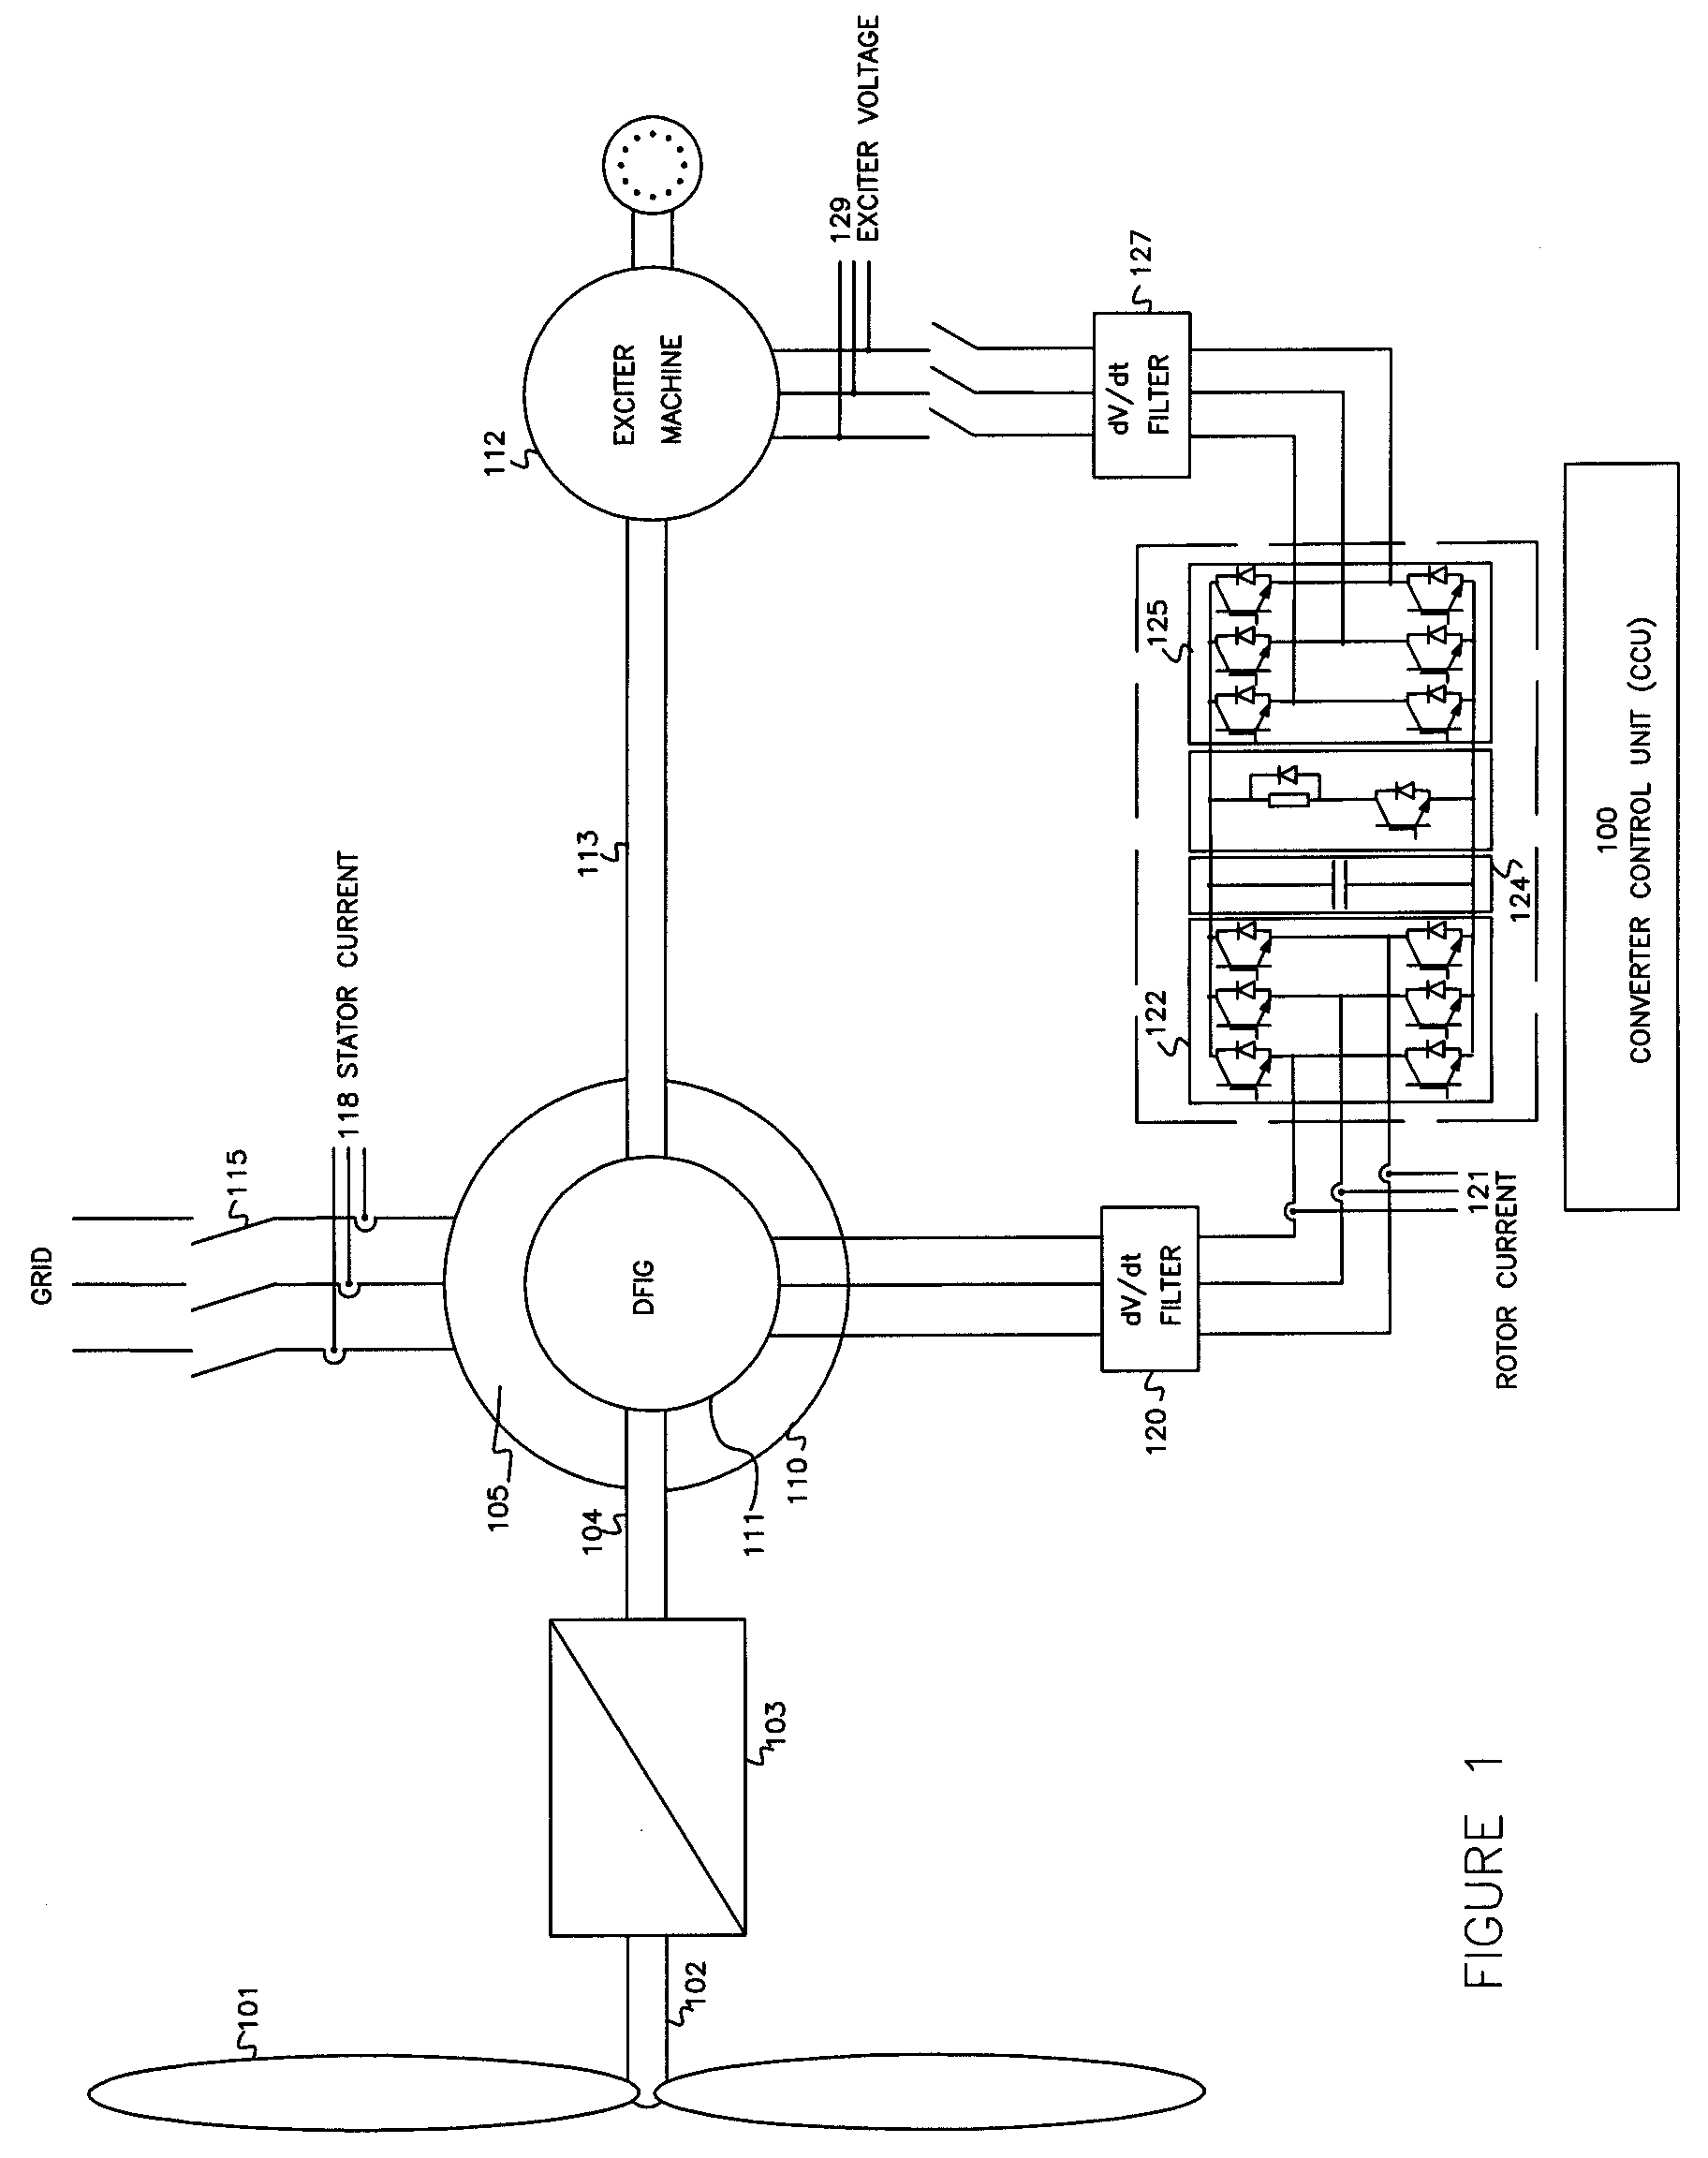 Low voltage ride through system for a variable speed wind turbine having an exciter machine and a power converter not connected to the grid